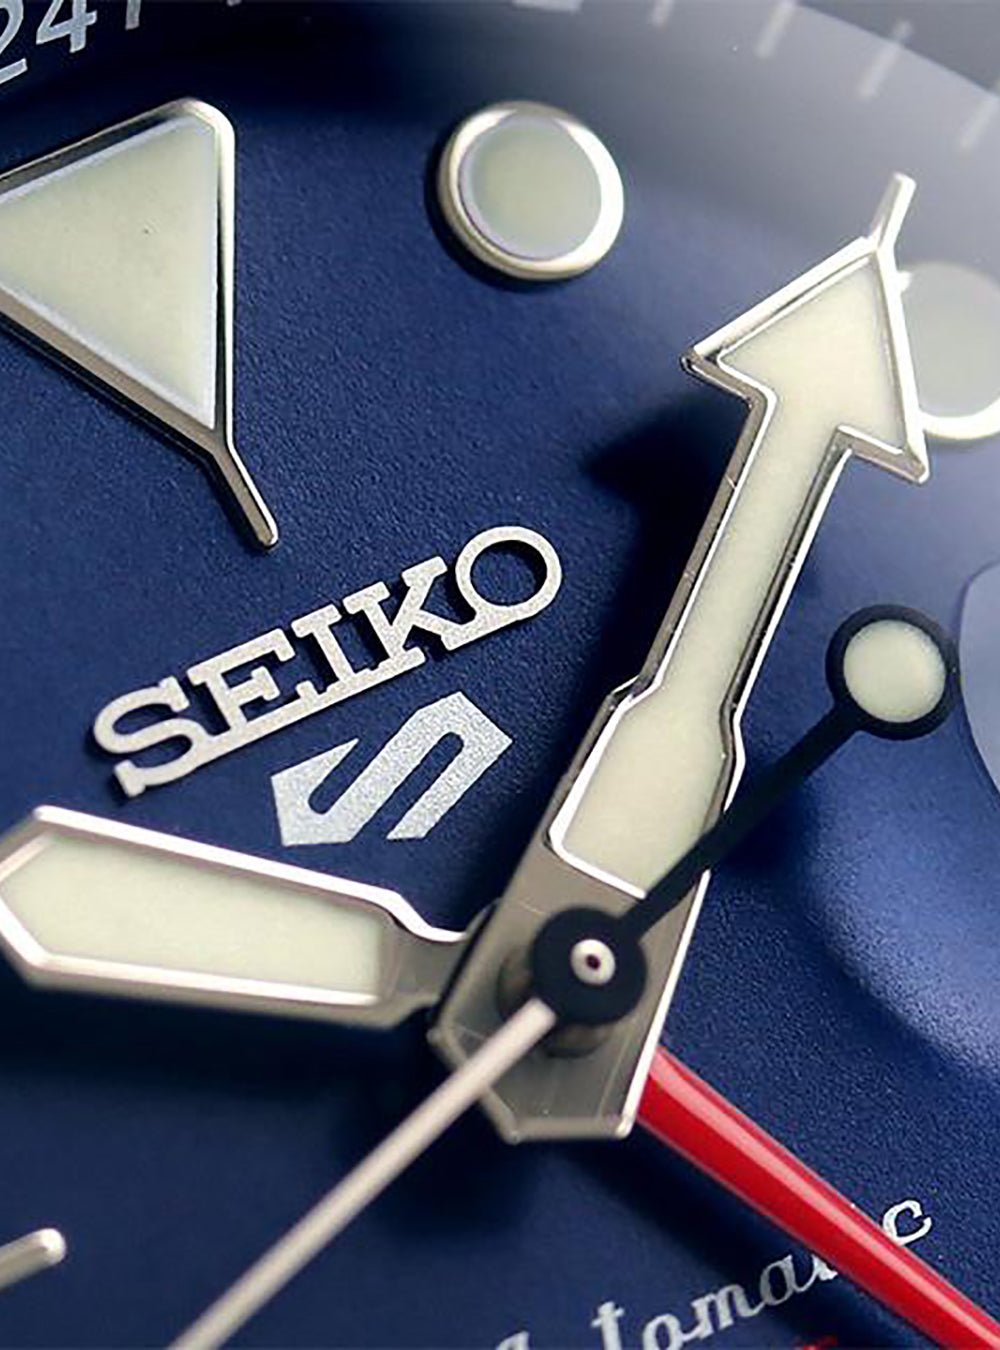 SEIKO 5 SPORTS SKX SPORTS STYLE GMT SBSC003 MADE IN JAPAN JDM